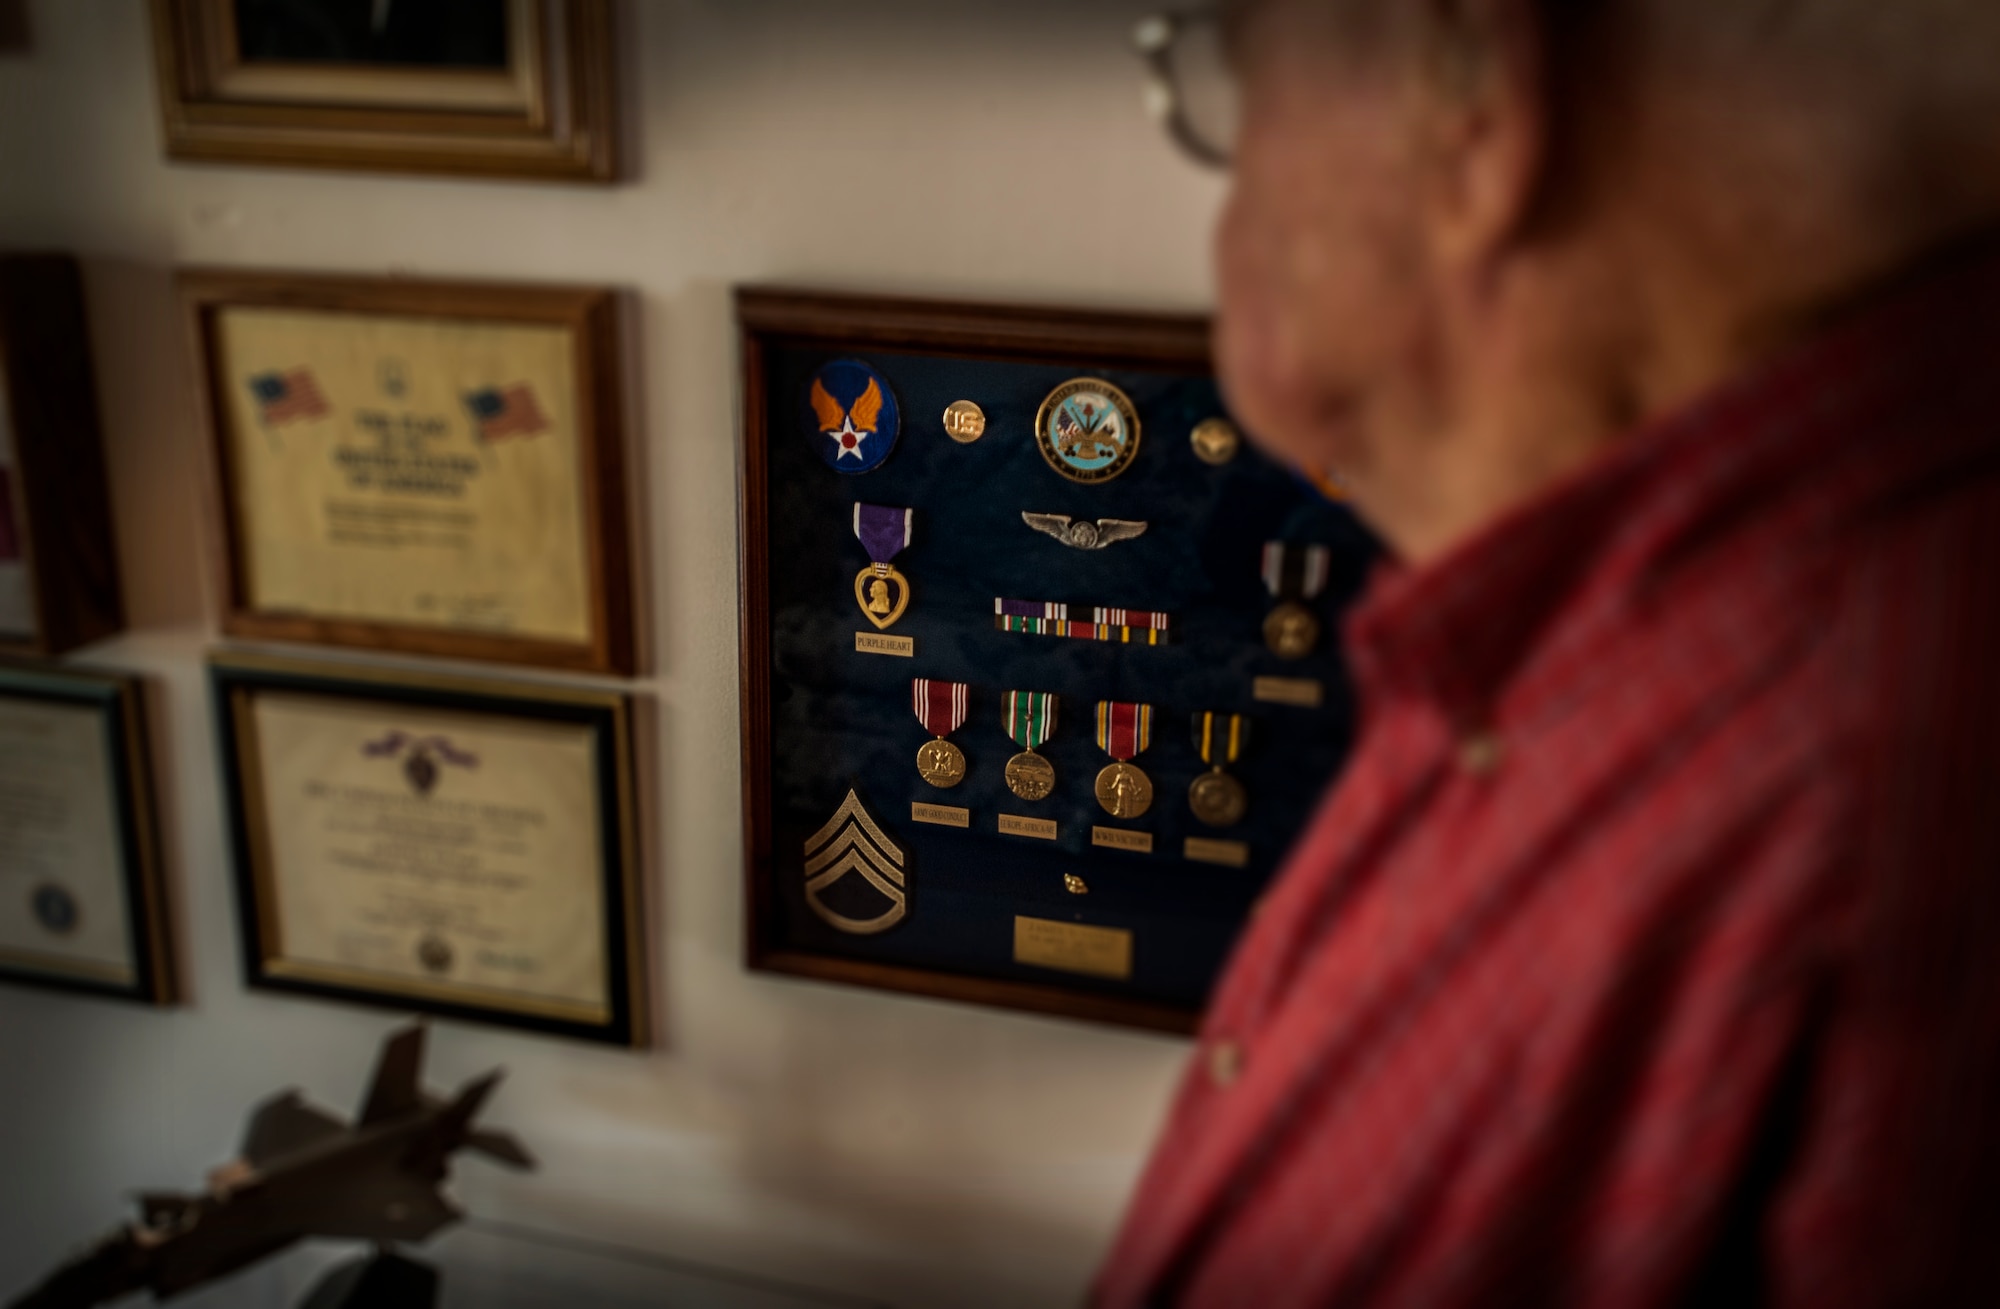 Jim Gatch, 89-year-old Army Air Corps veteran and World War II Prisoner-of-War, reflects on his POW experience by looking at his military decorations, including the Purple Heart, for a photograph Sept. 10, 2012, at his home in Summerville, S.C. On May 12, 1944, while assigned to the 379th Bomb Group, Gatch was a base gunner on a B-17 aircraft that was shot down by the Germans. He was captured y the enemy and remained a POW for 358 days. The Purple Heart is a United States military decoration awarded in the name of the President to servicemembers wounded or killed while serving on or after April 5, 1917. On Sept. 21, Gatch will be in attendance with other surviving Lowcountry POWs in observance of the National POW/MIA Recognition Day. (U.S. Air Force Photo / Airman 1st Class Tom Brading)